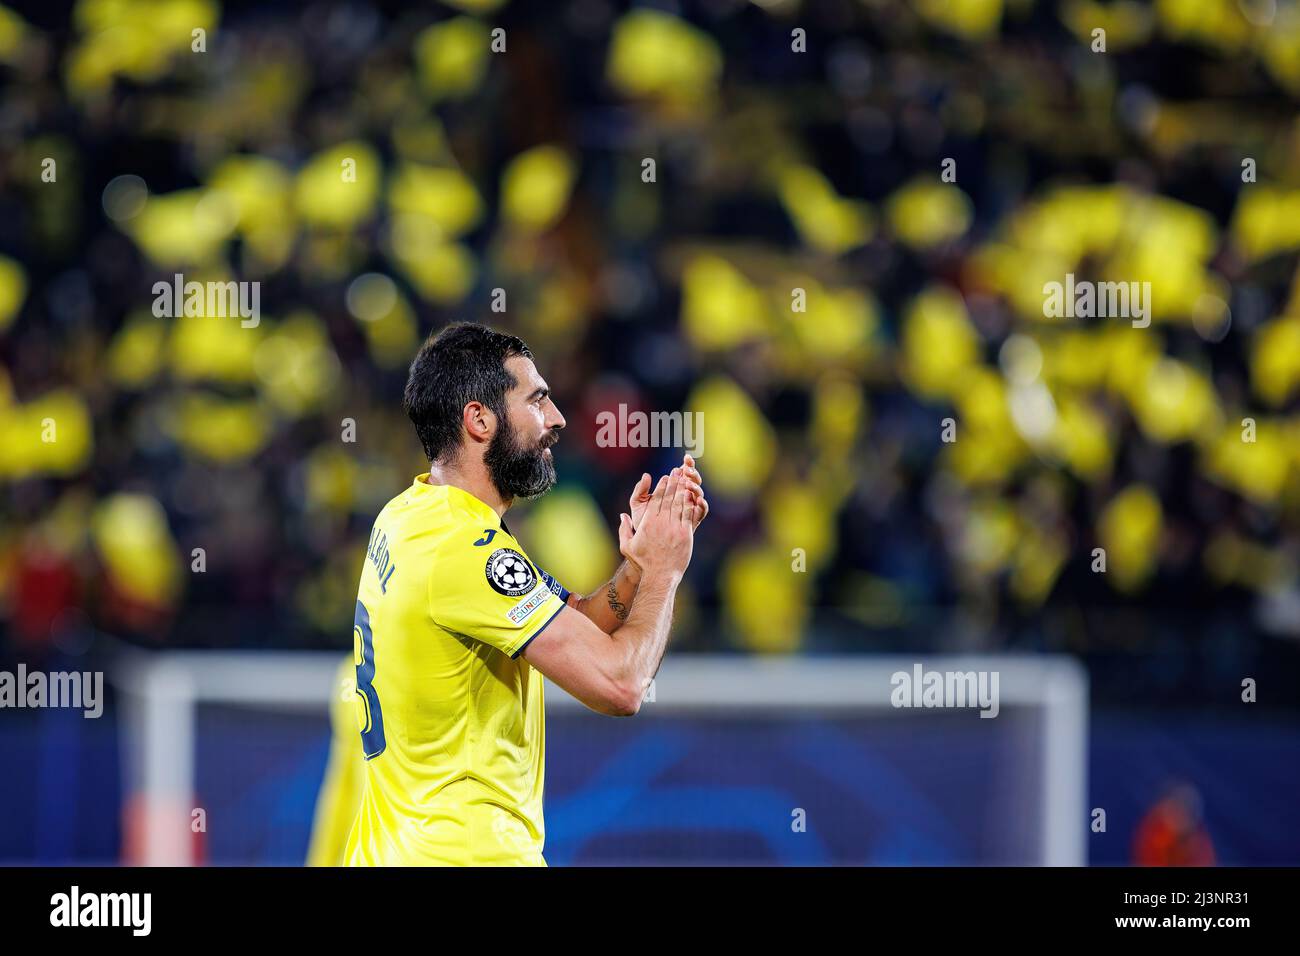 VILLARREAL, SPAIN - APR 6: Albiol salutes the fans  at the end of the UEFA Champions League match between Villarreal CF and FC Bayern Munchen at Estad Stock Photo